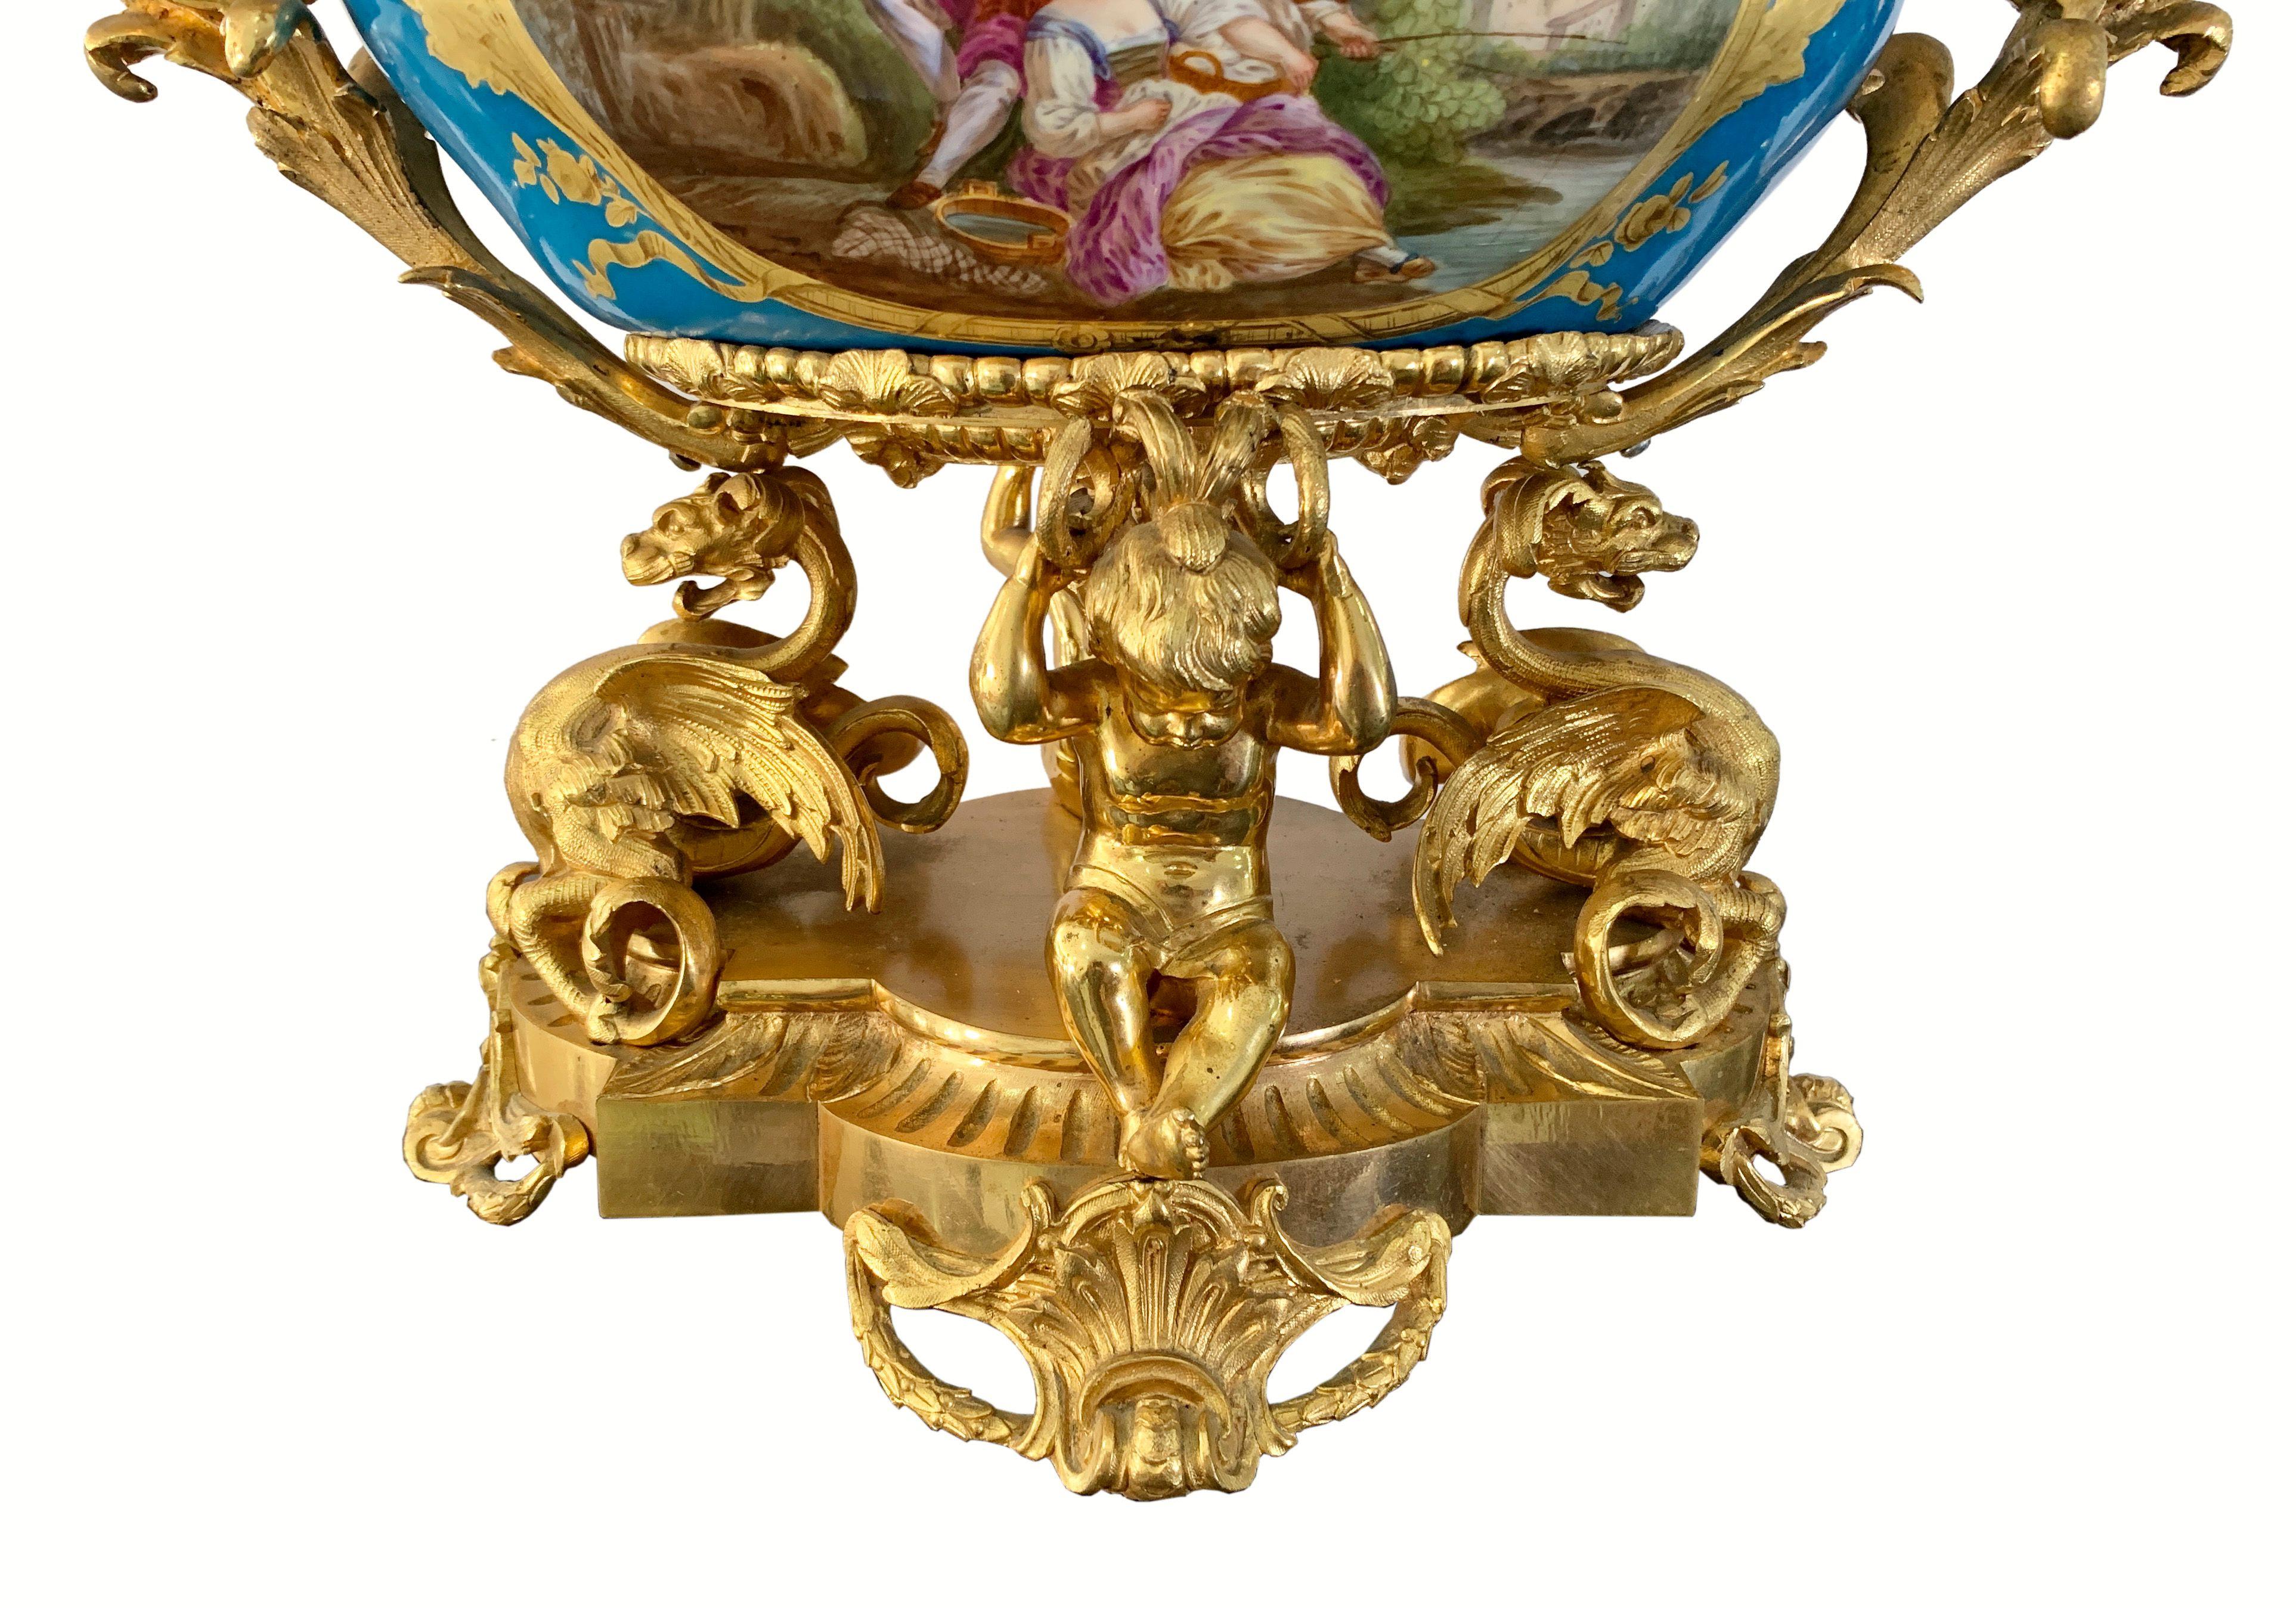 19th century French Gilt Bronze Mounted Sevres style Centerpiece For Sale 2